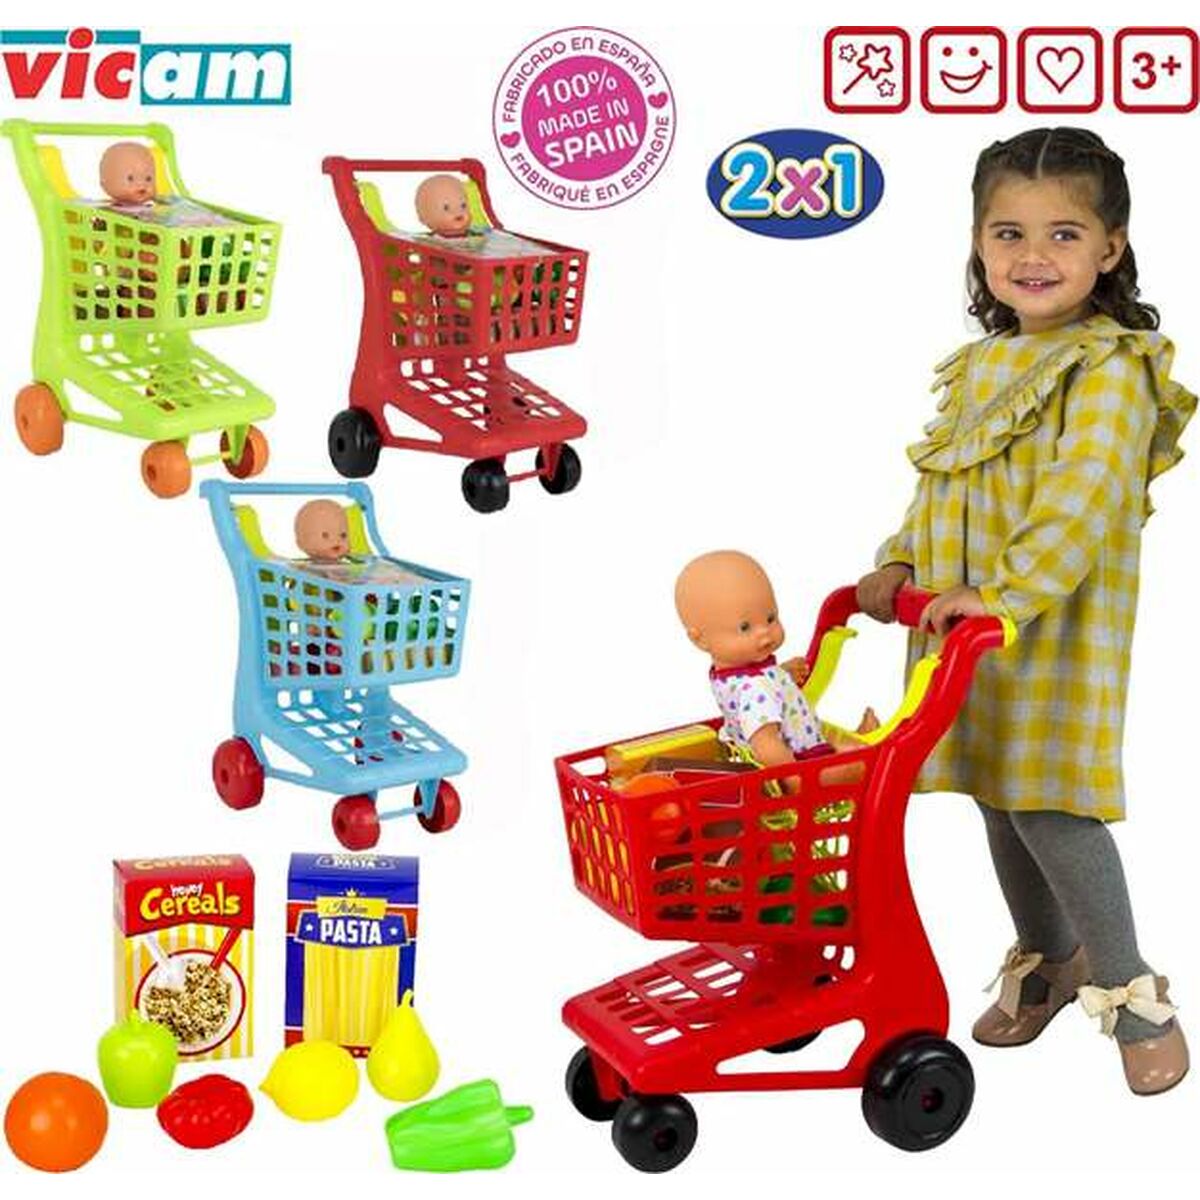 Shopping cart Accessories Figure Toy